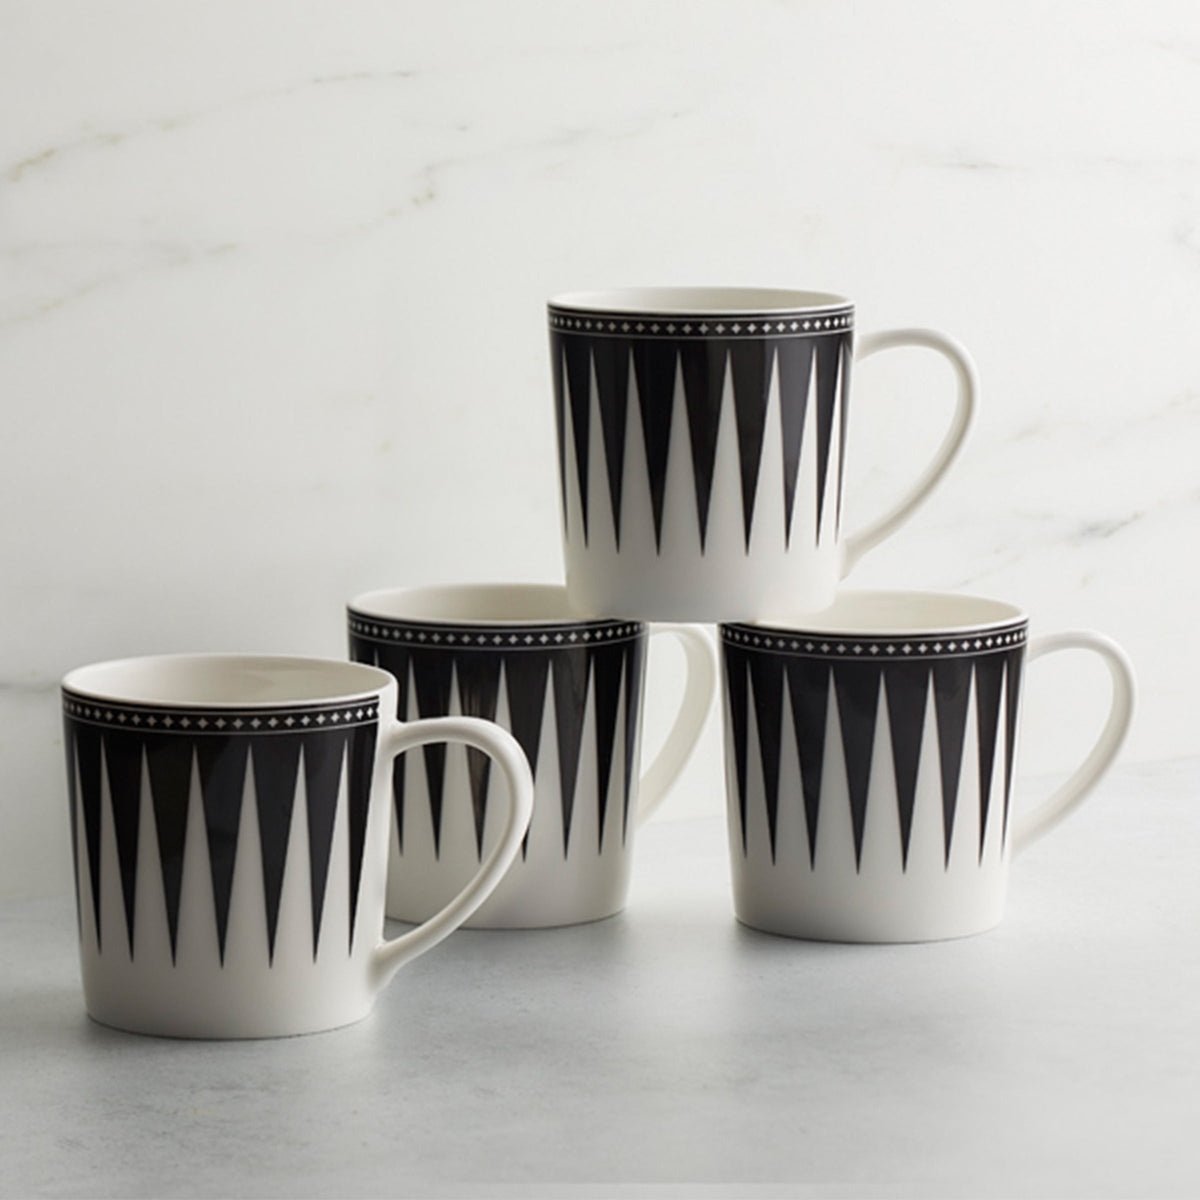 Four high-fired porcelain Marrakech Mugs by Caskata Artisanal Home with black geometric triangle patterns, placed on a light grey surface against a white background. These Art Deco inspired Marrakech Mugs bring an elegant touch to any setting.